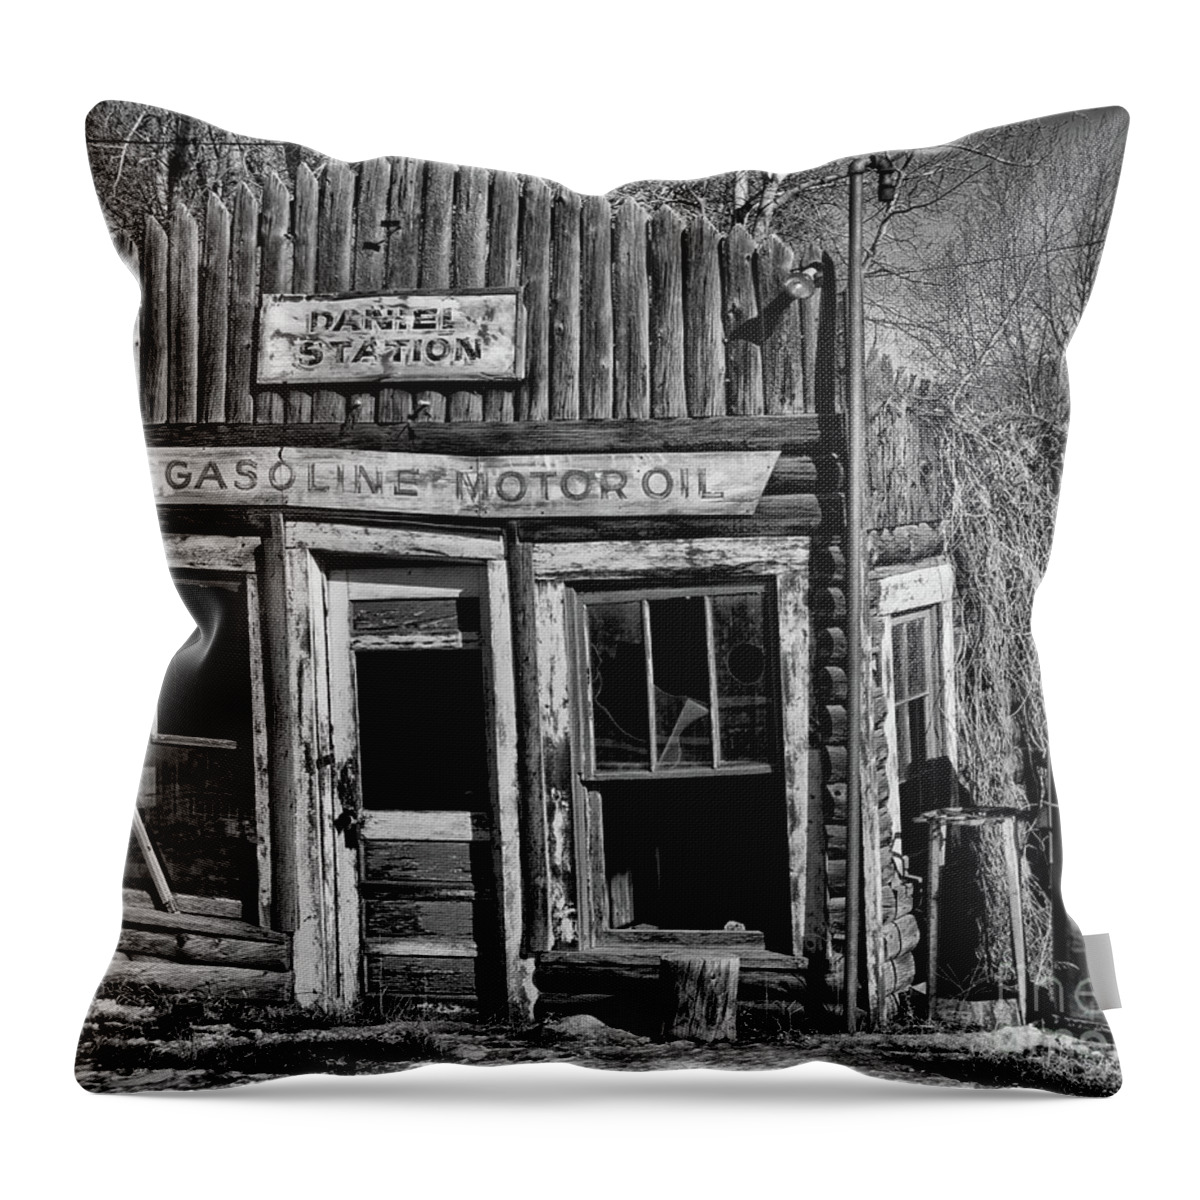 Wyoming Throw Pillow featuring the photograph Daniel Station by Edward R Wisell